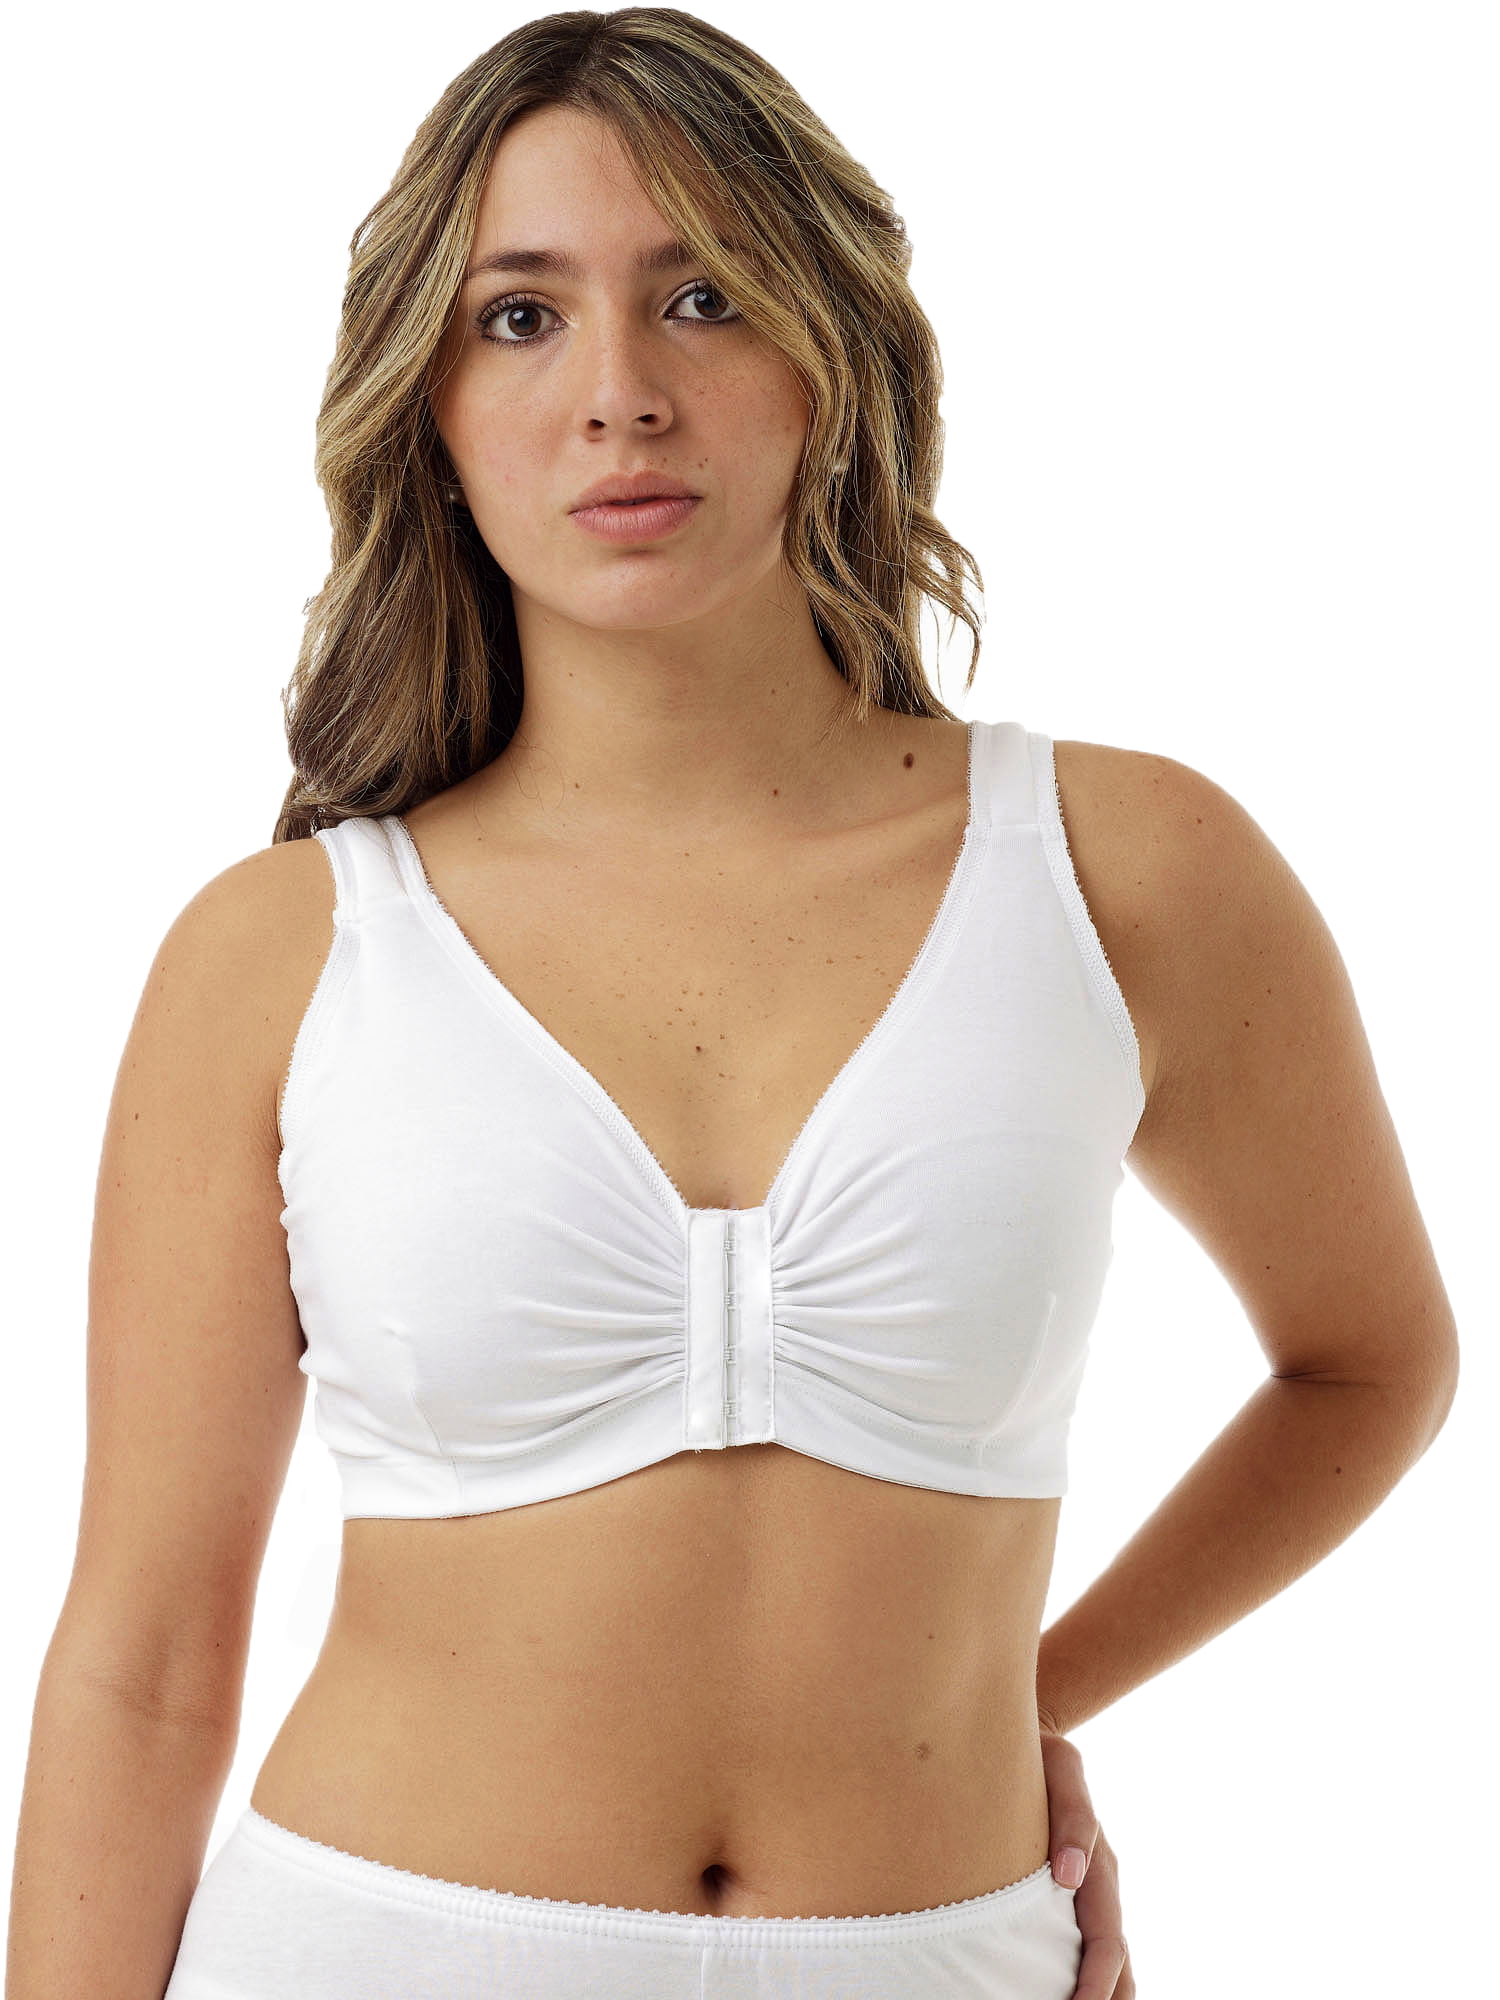 Underworks Mastitis Therapy Bra with Pocket - Hot Compress Pads Included -  Adjustable - Postpartum Breast Engorgement Relief - 36-38-bcd - White